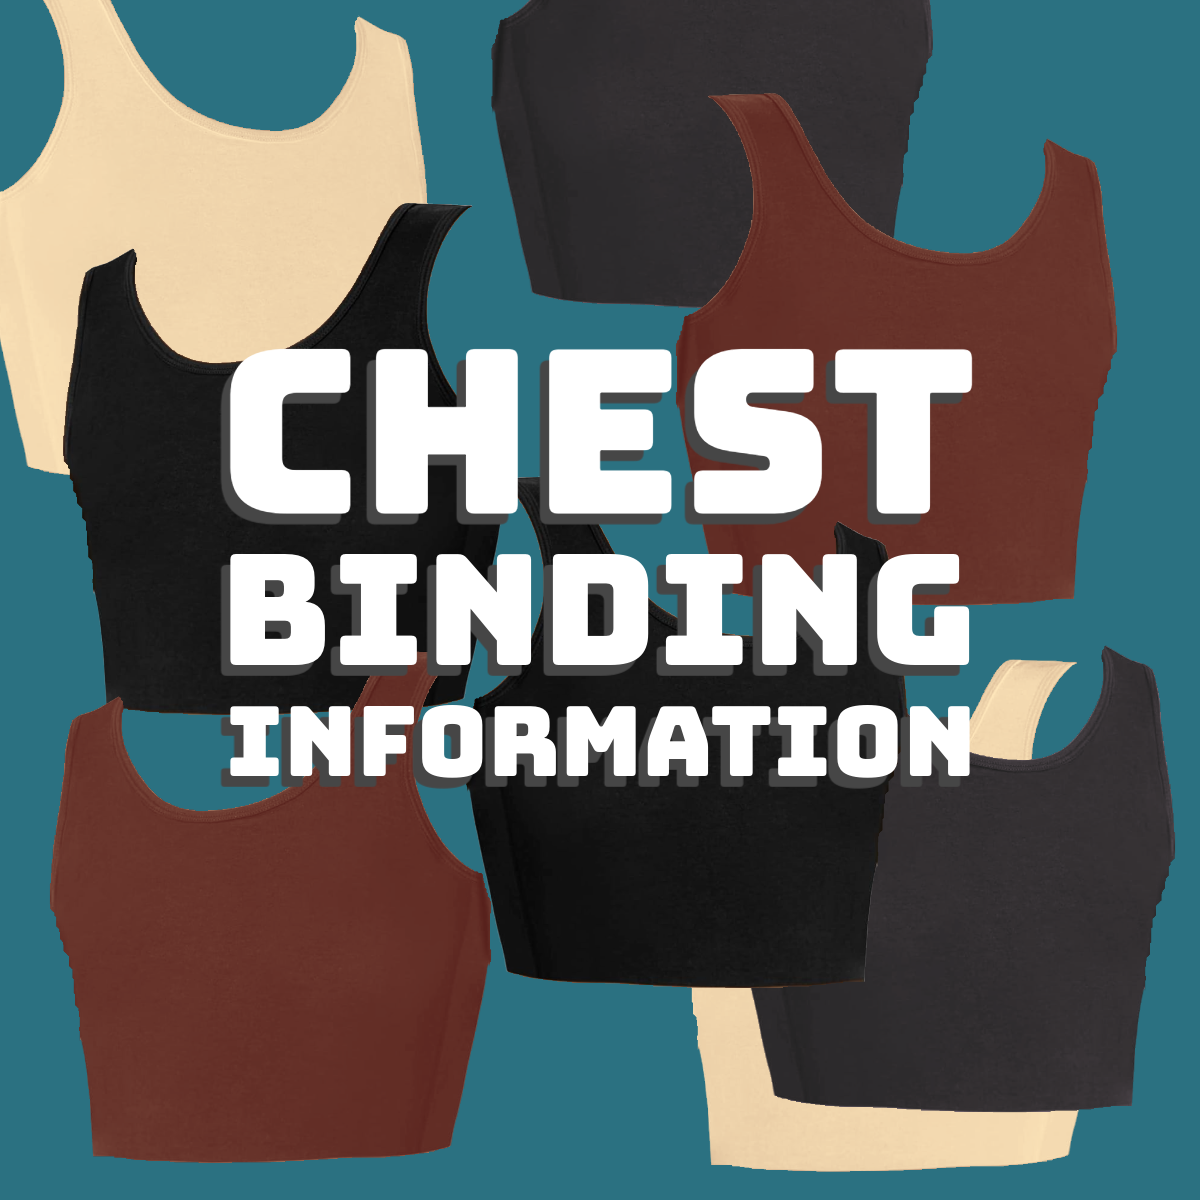 chest binding Information with pictures of chest binders in the background